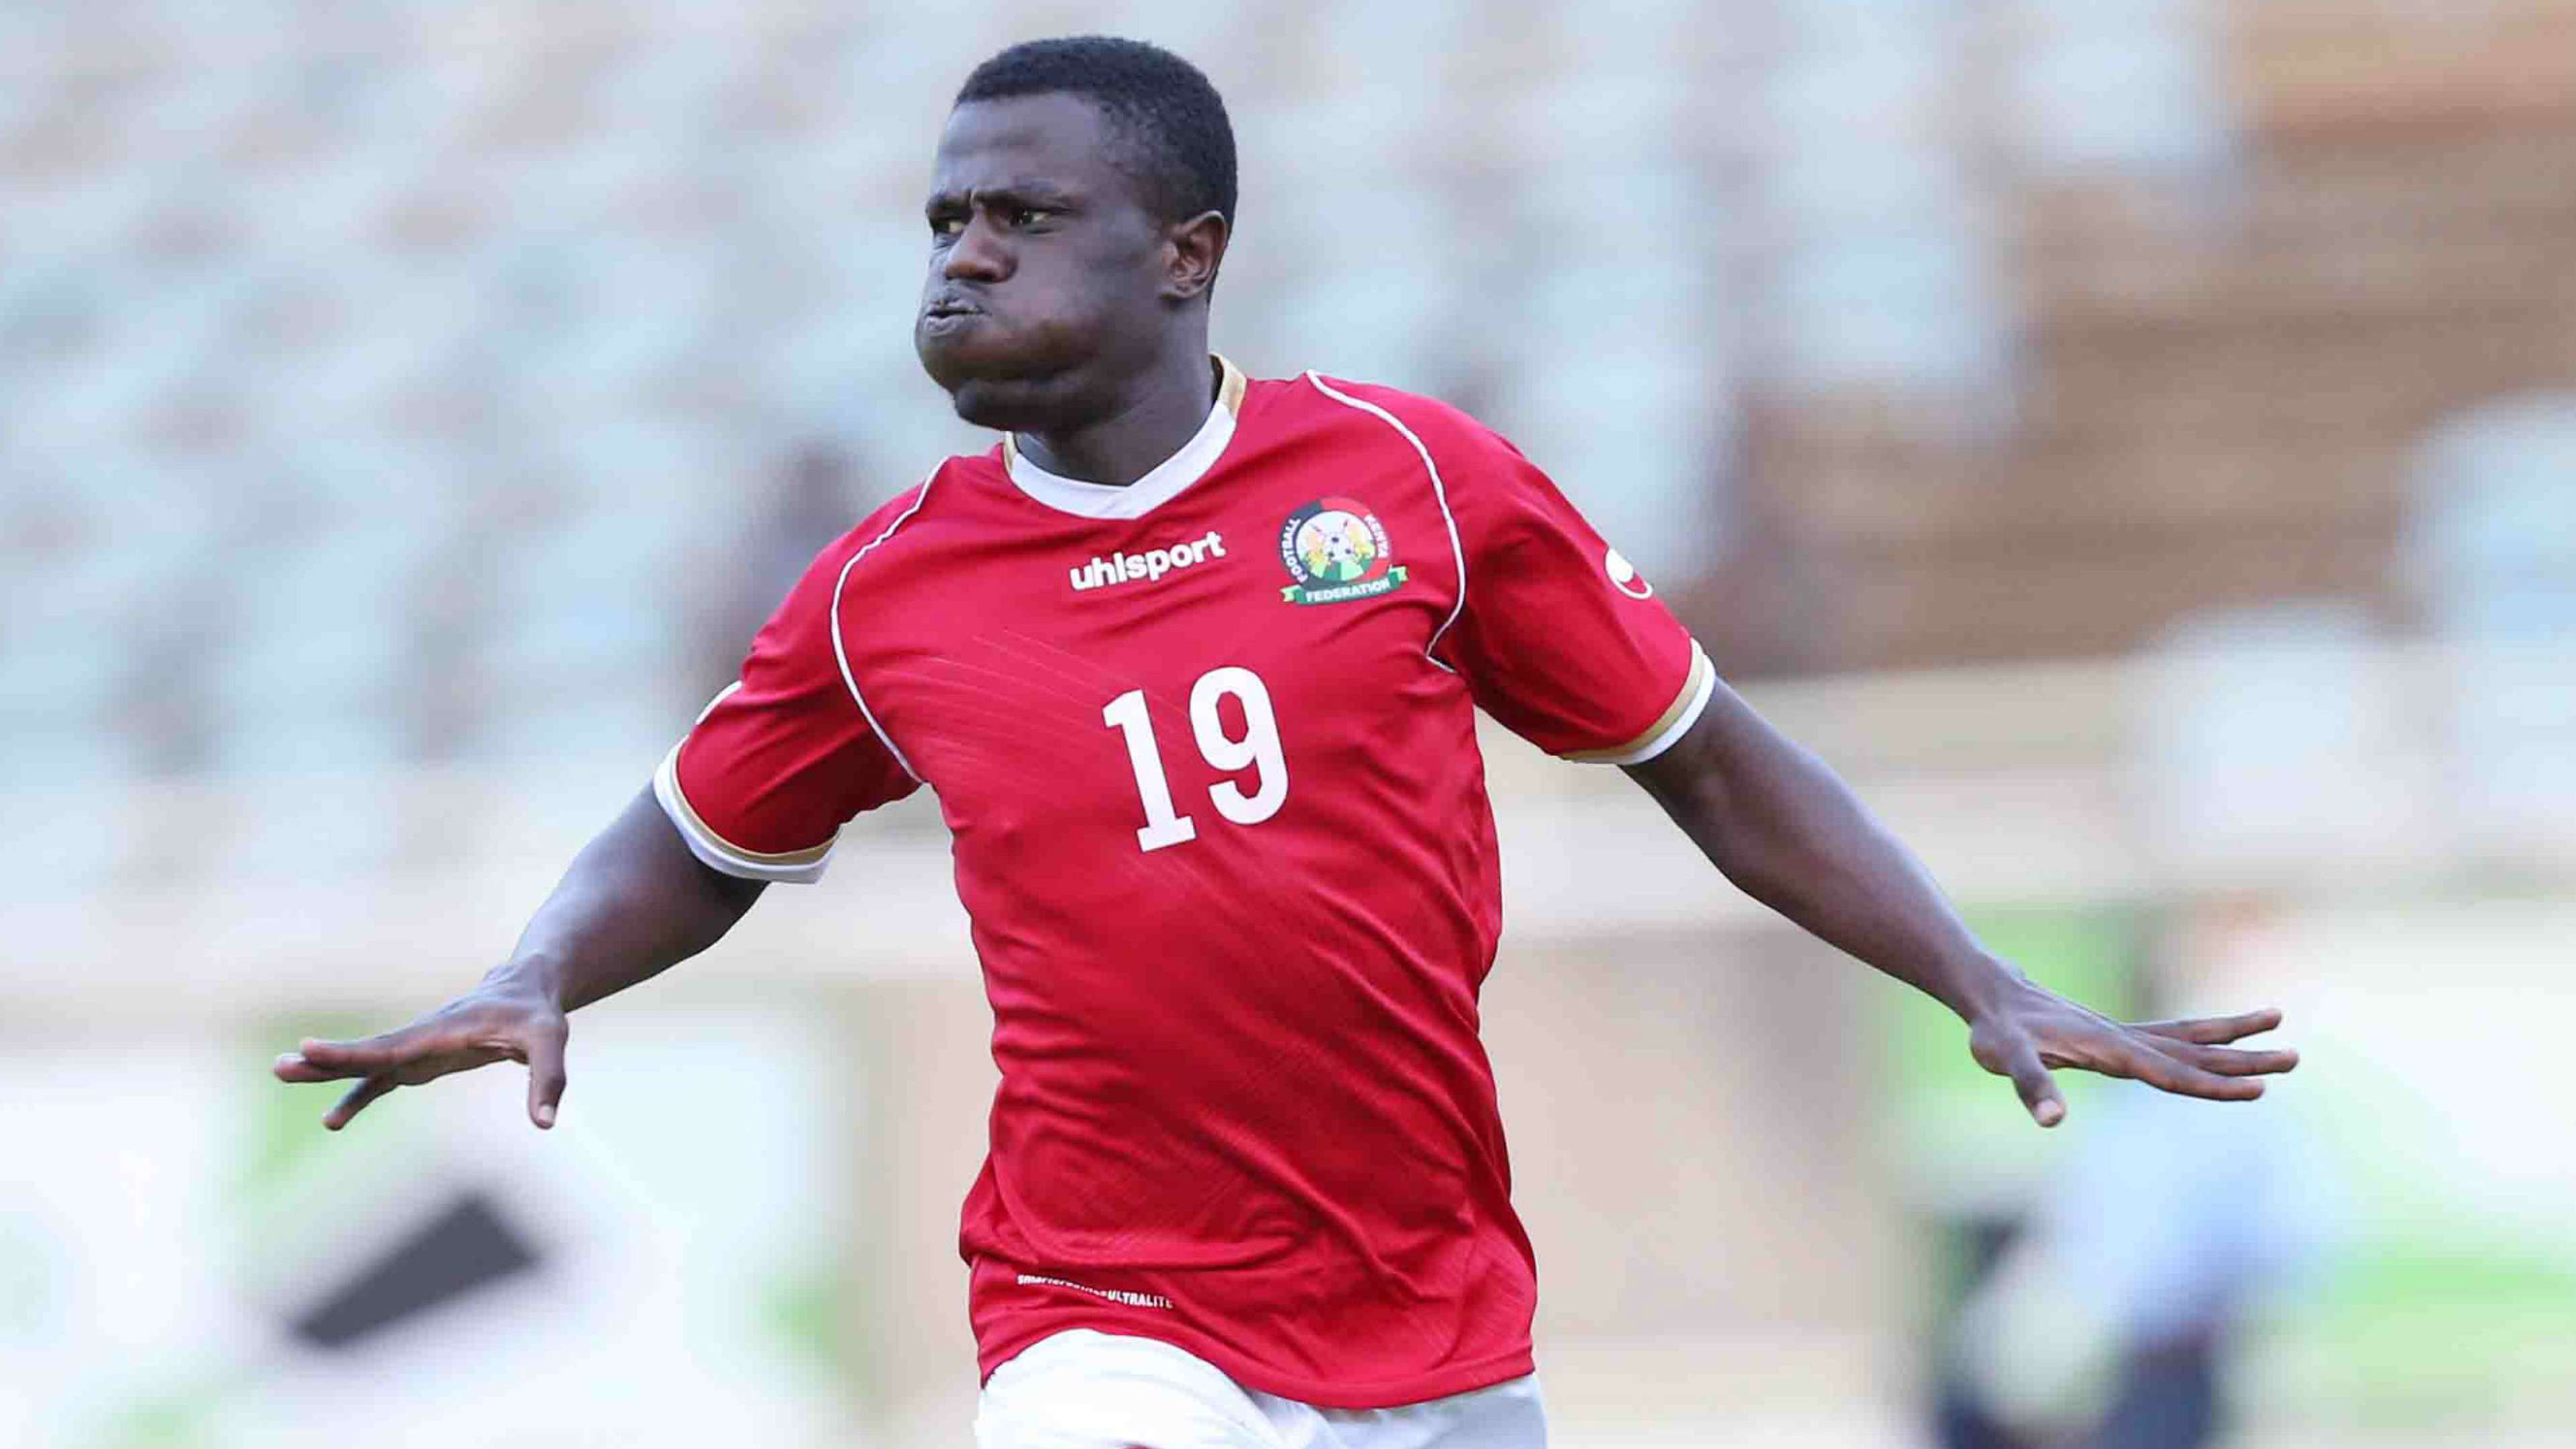 Harambee Stars were forced to wait until second half to score opener through Paul Were